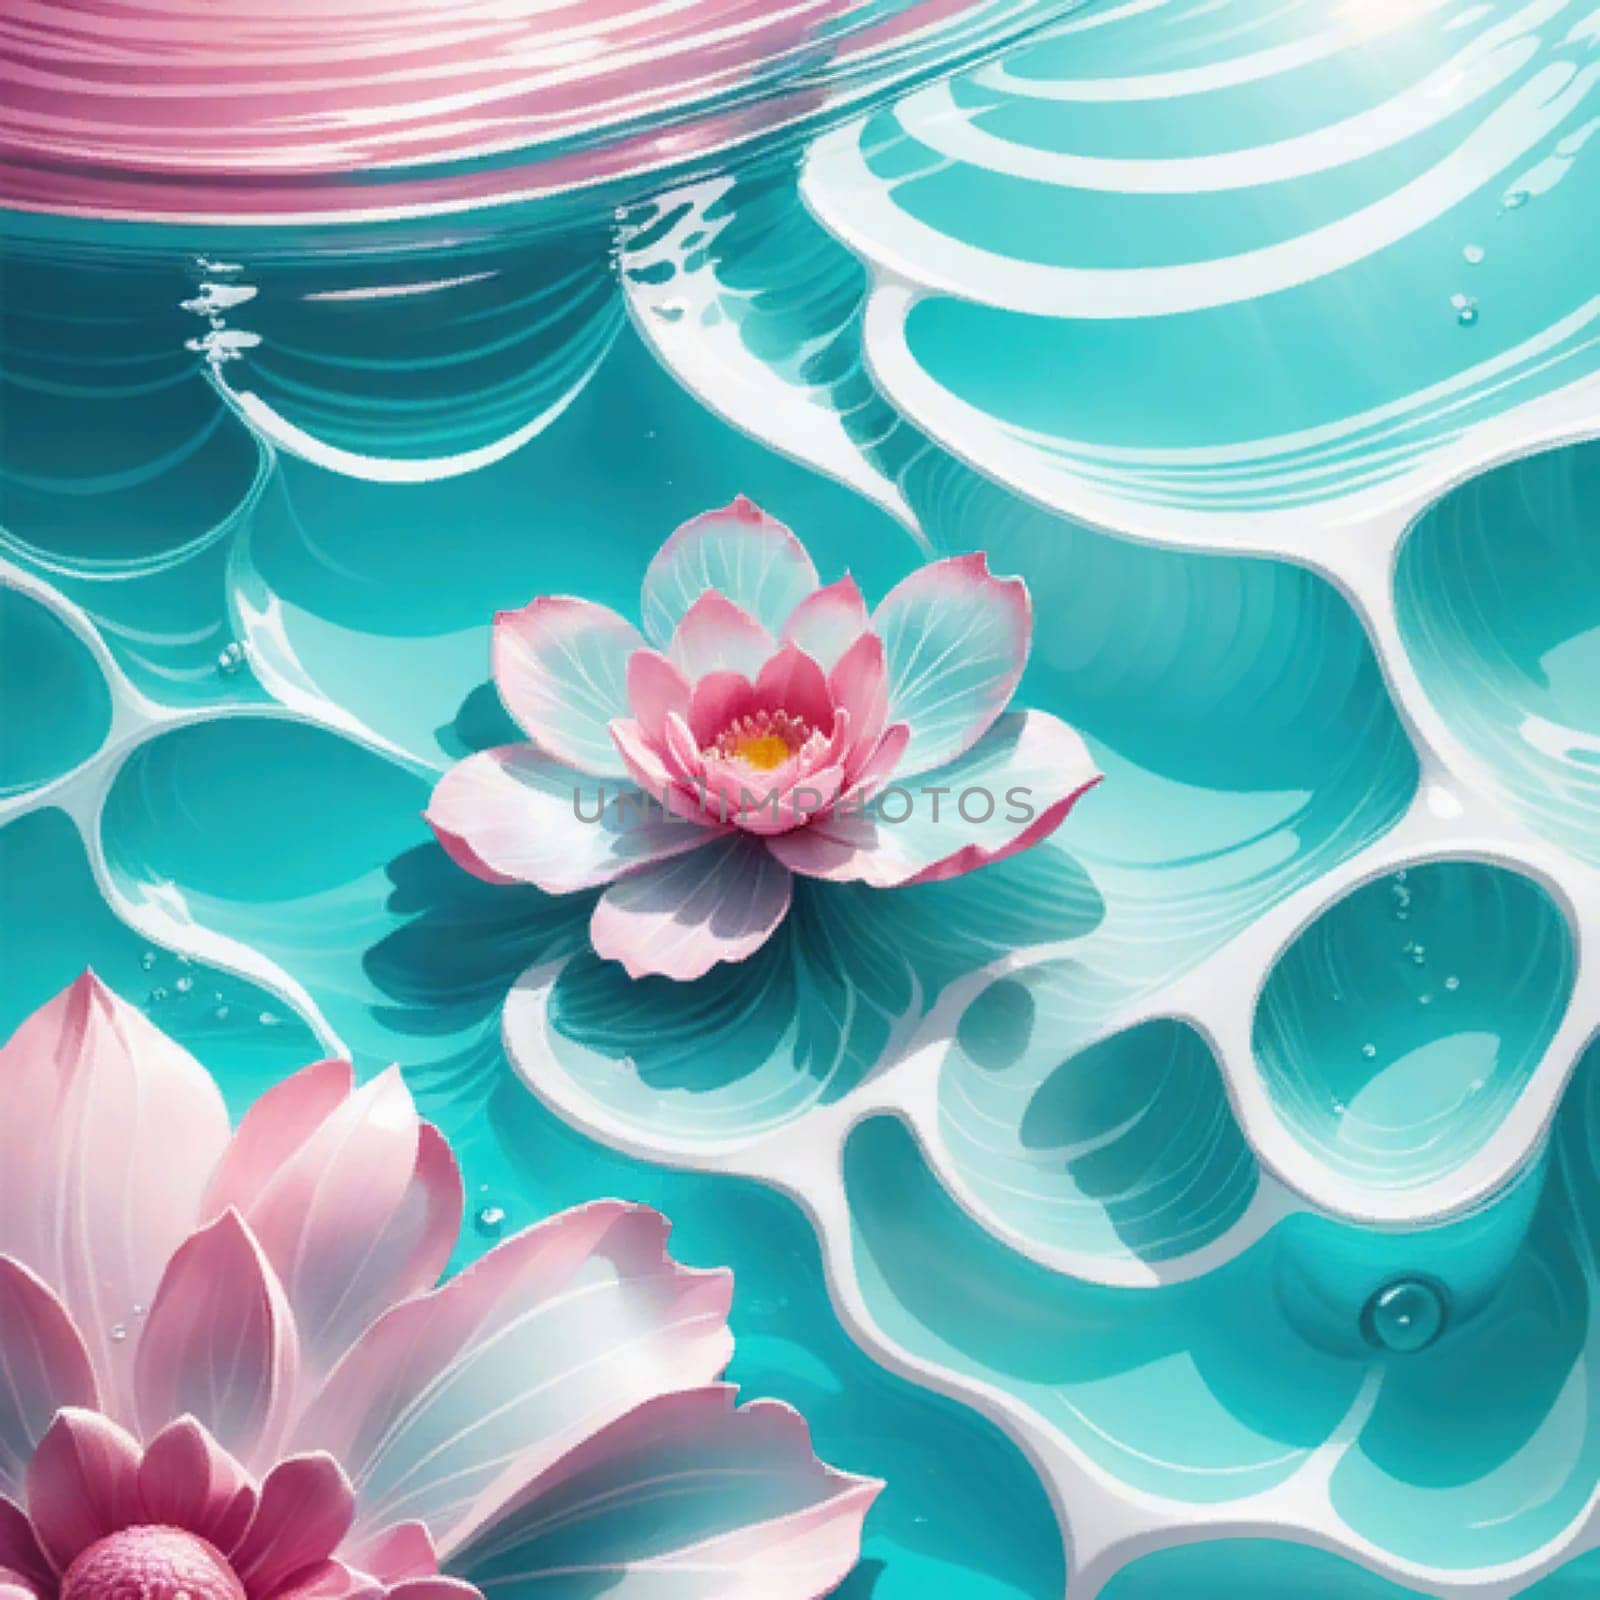 Pink flowers lilies and buds floating on blue surface water with rings by EkaterinaPereslavtseva